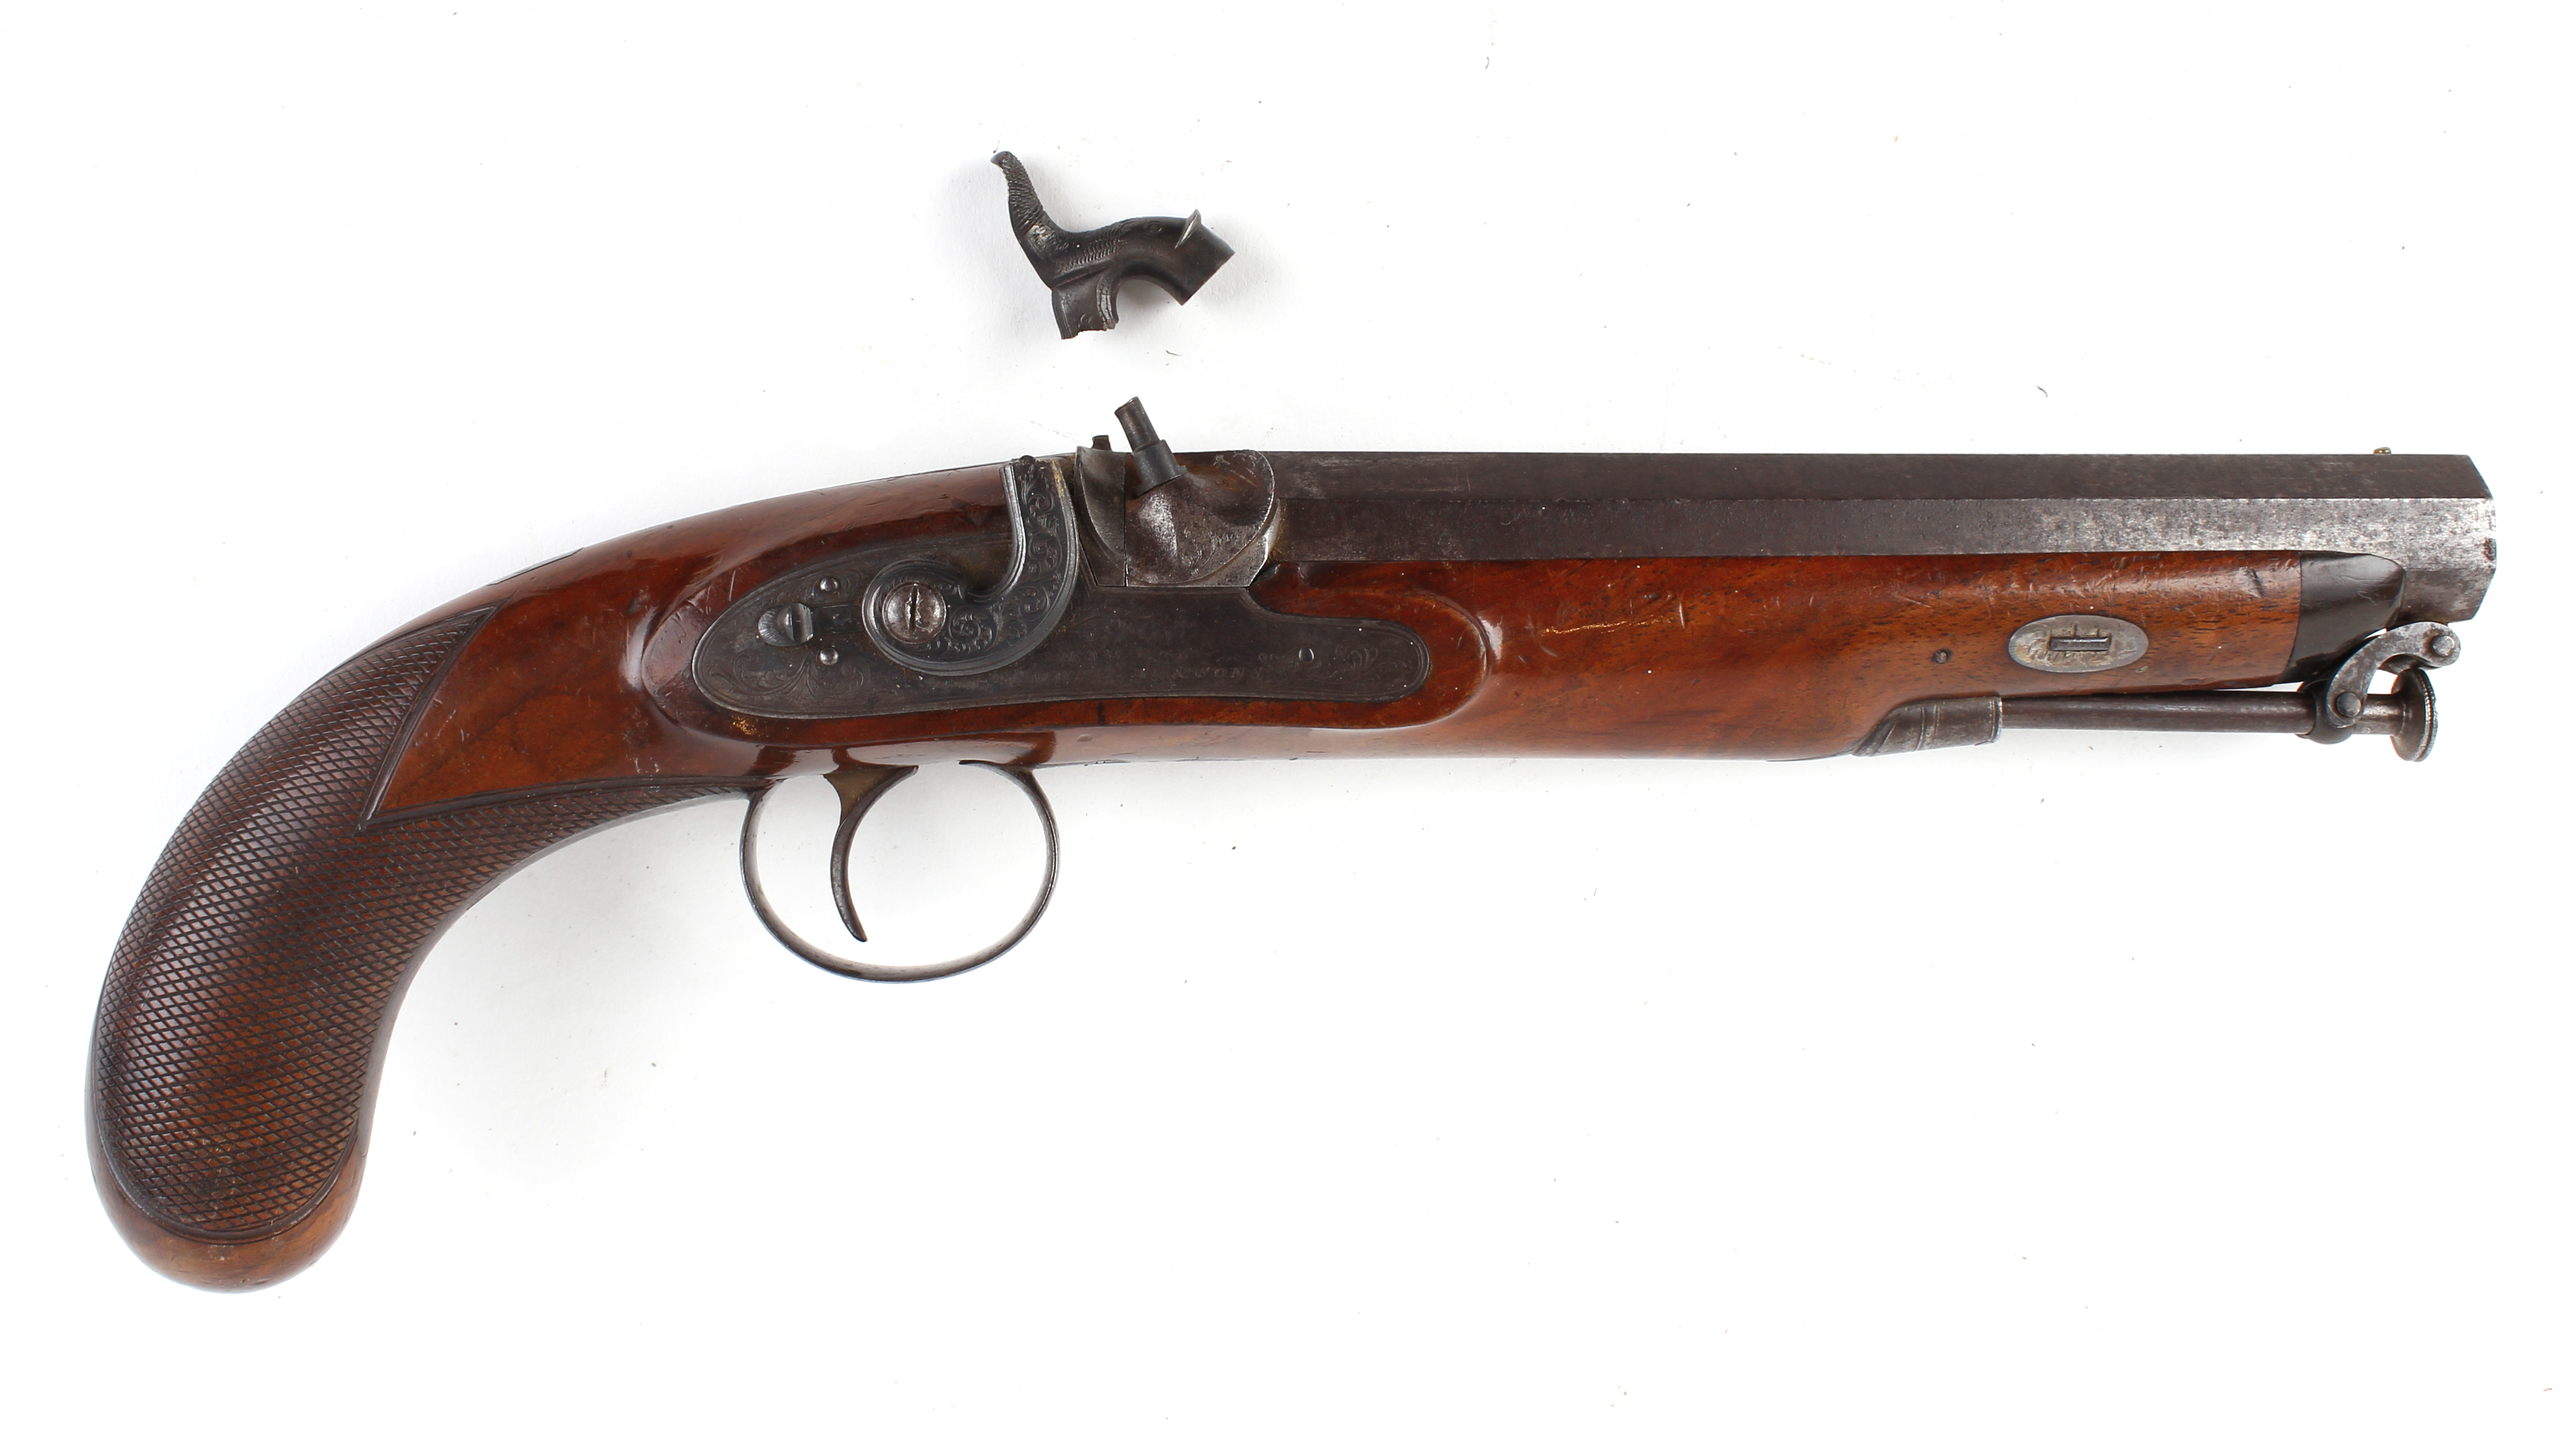 18 bore percussion pistol by Hawkes Moseley & Sons, 8 ins octagonal barrel engraved London with